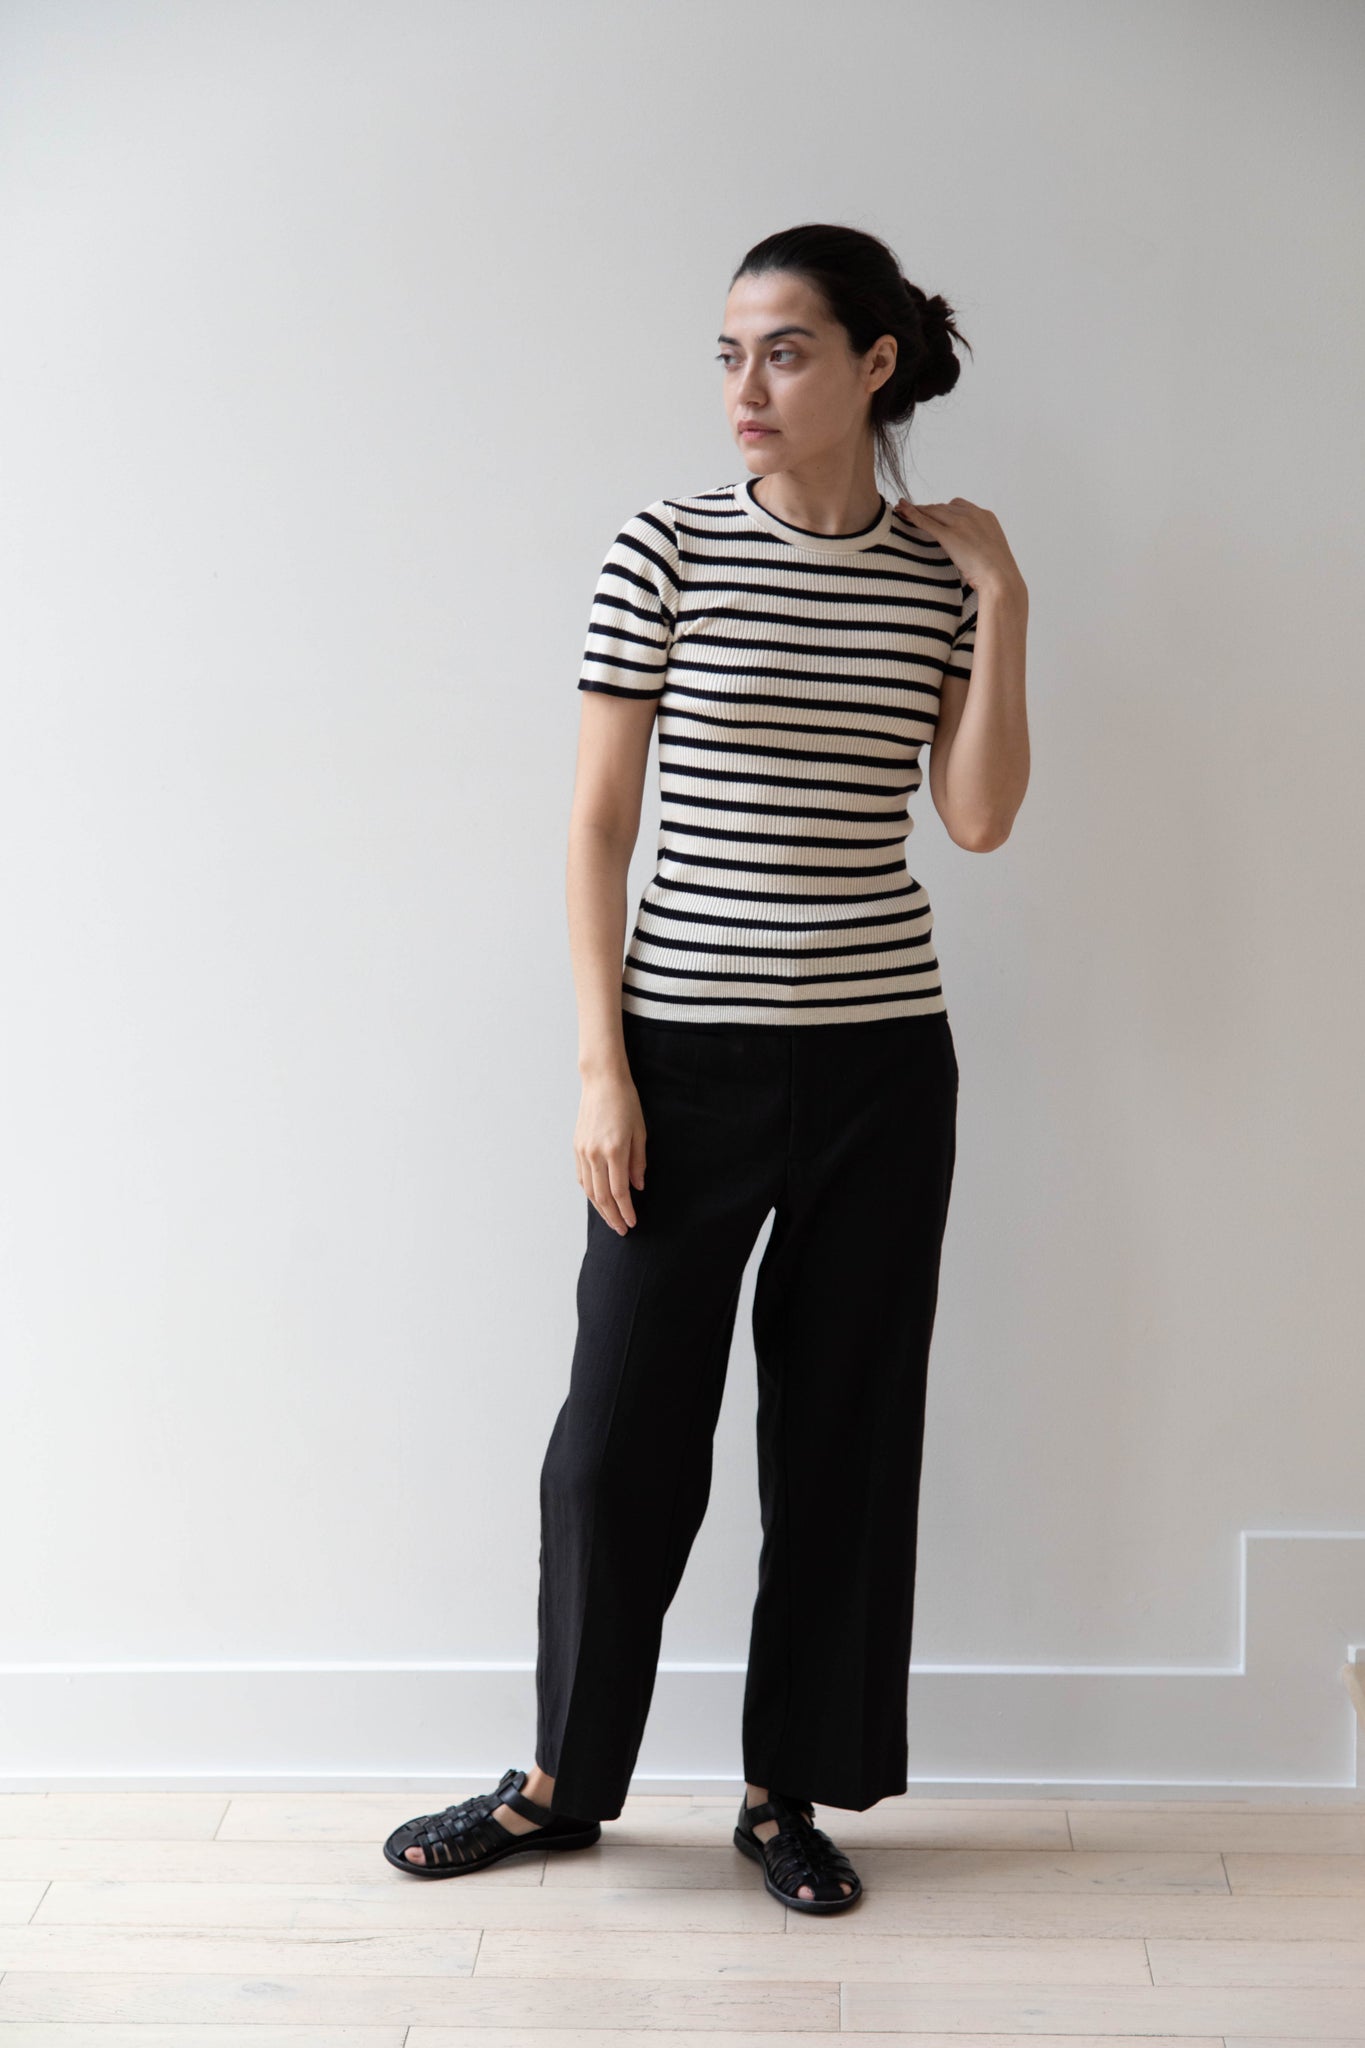 Old Man's Tailor | Ribbed Knit Half Sleeve Top in Stripes